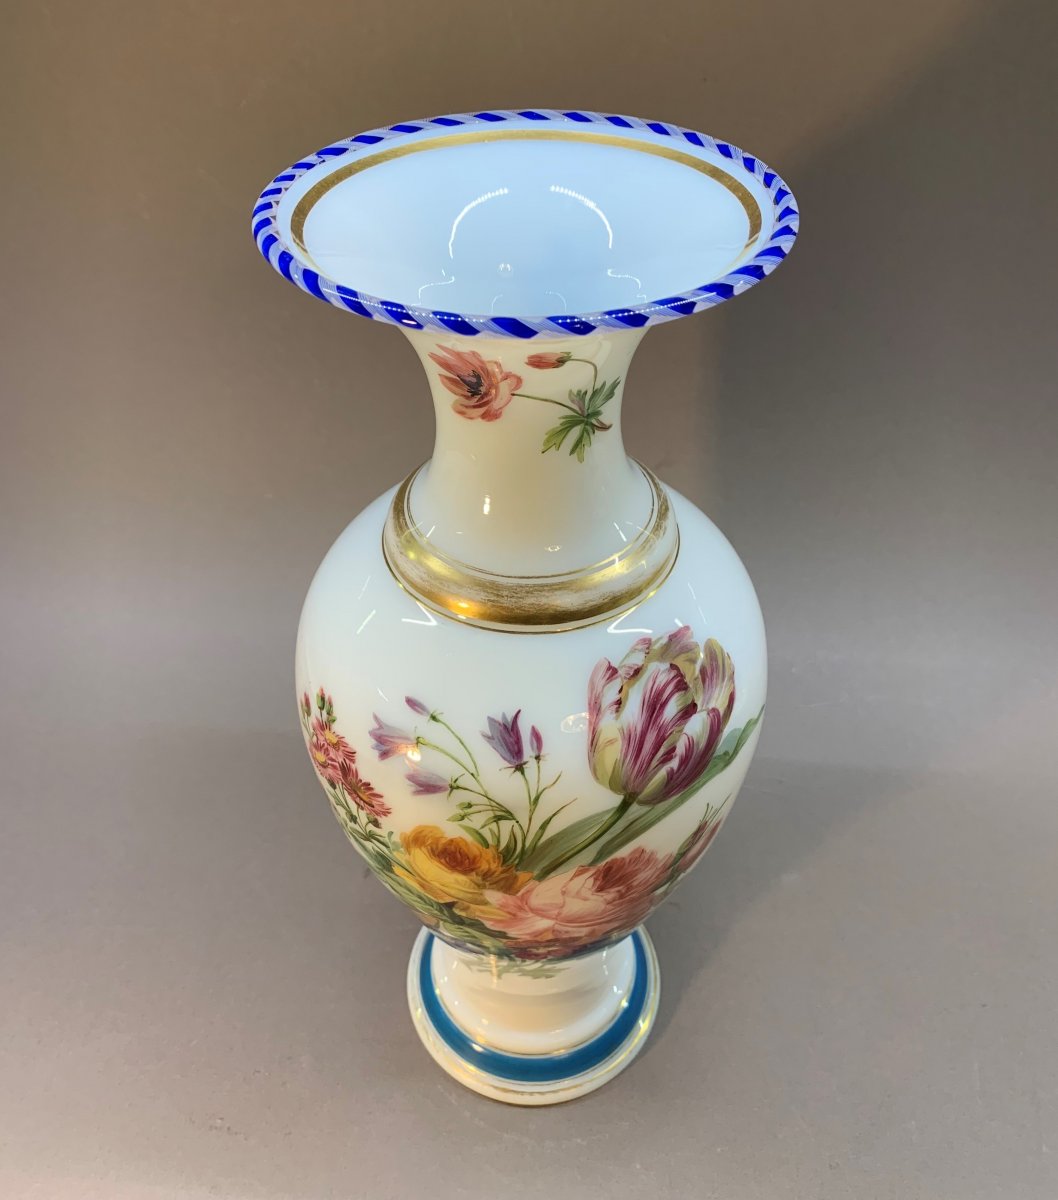 Baccarat:  Lovely Large Opaline Vase With Floral Decoration, By Jean-françois Robert-photo-4